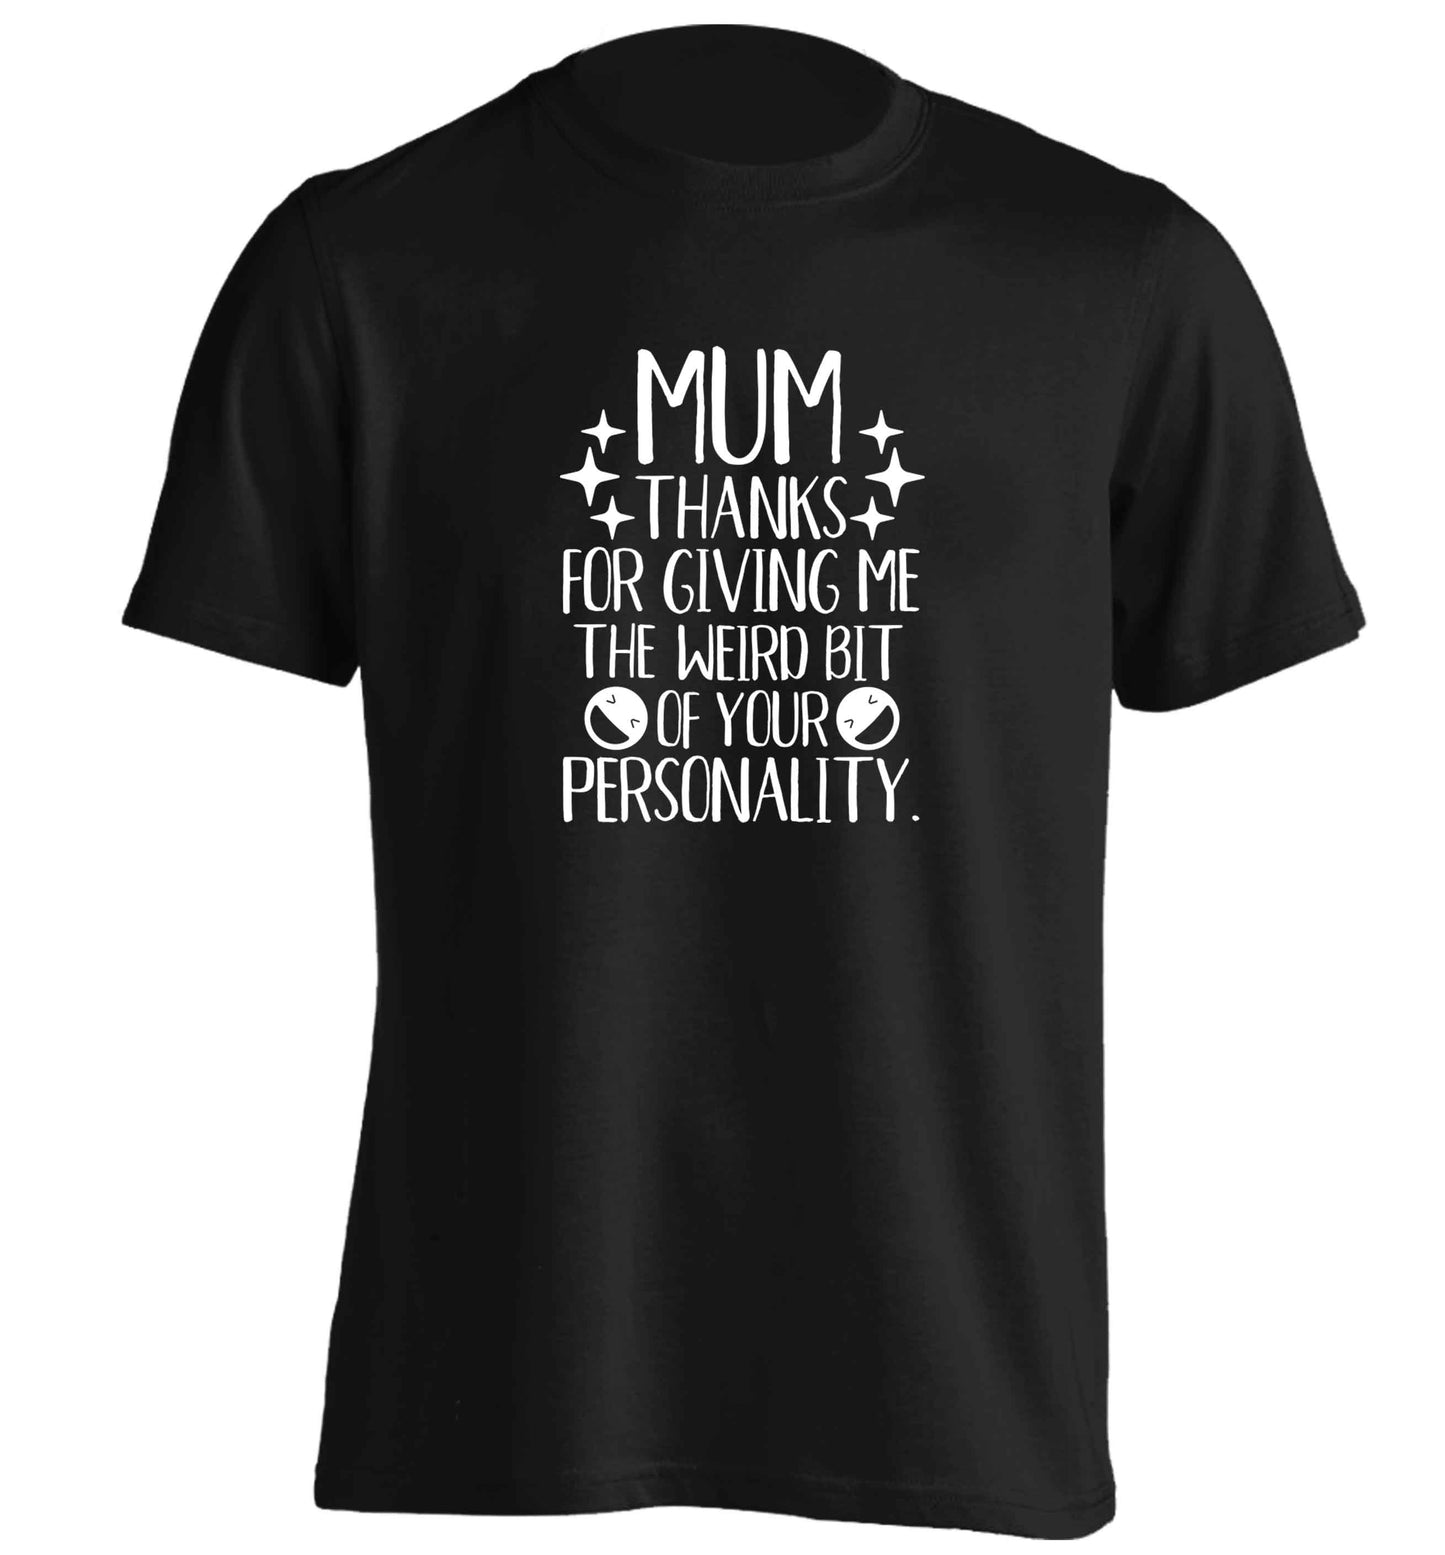 Mum thanks for giving me the weird bit of your personality adults unisex black Tshirt 2XL